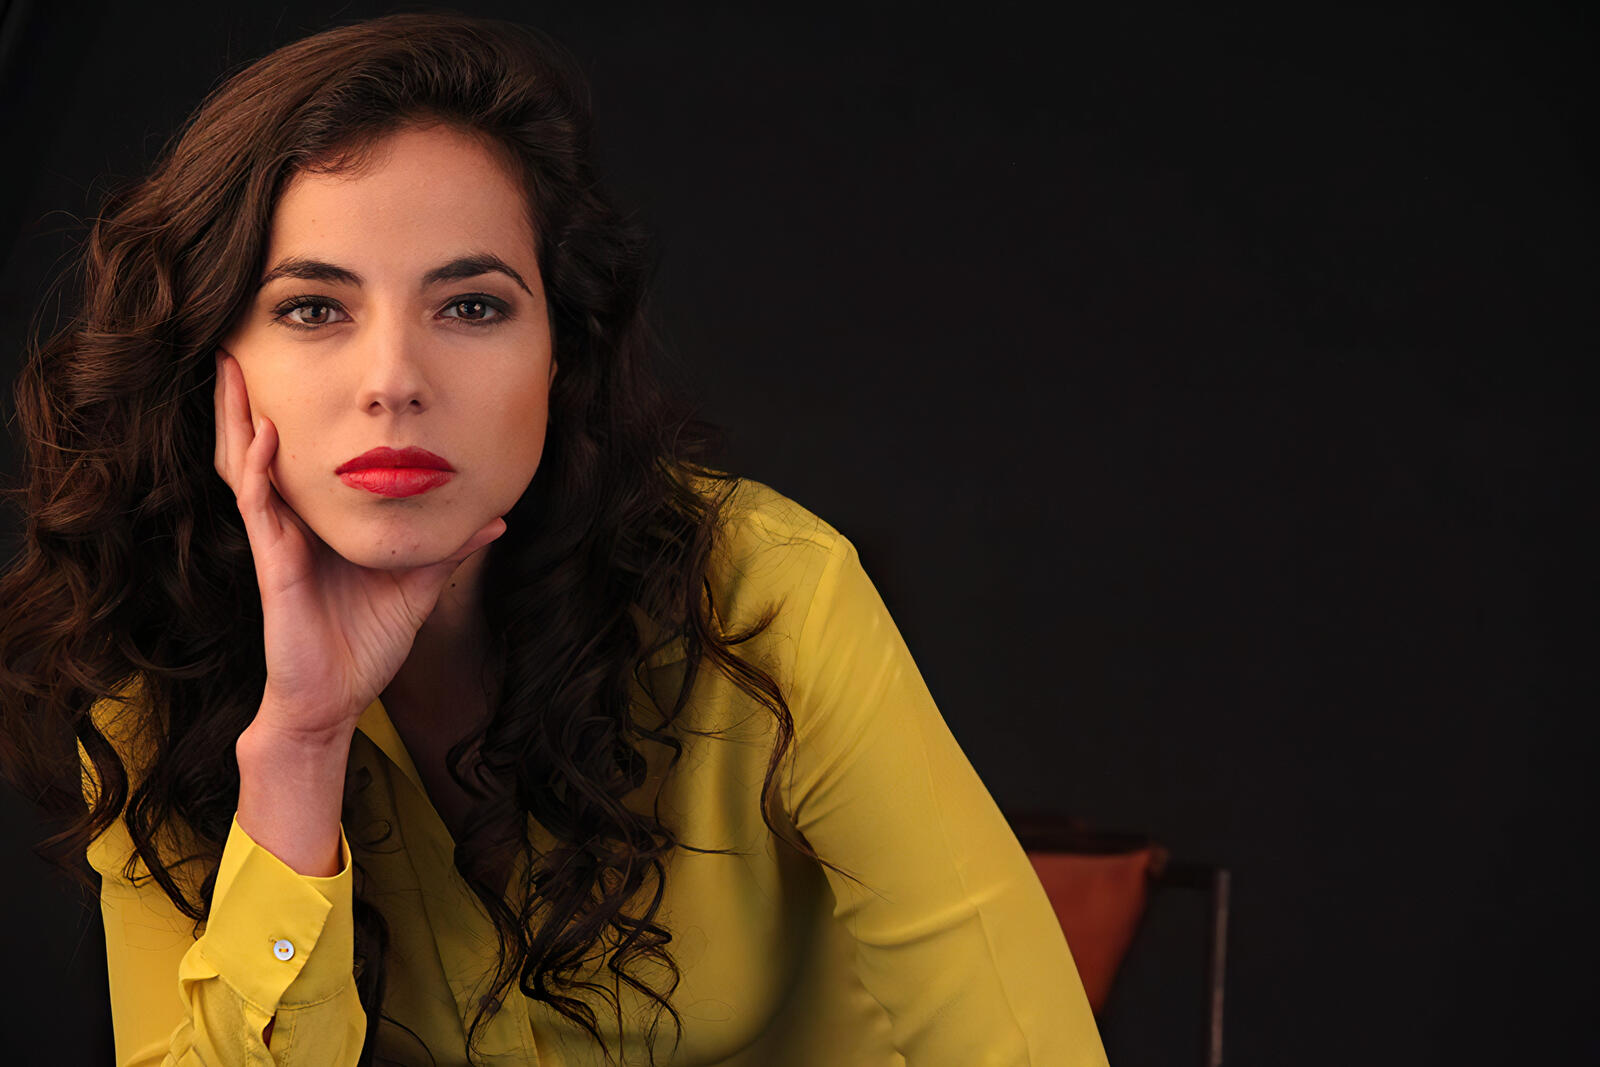 Free photo Christina Rodlo in a yellow blouse on a black background